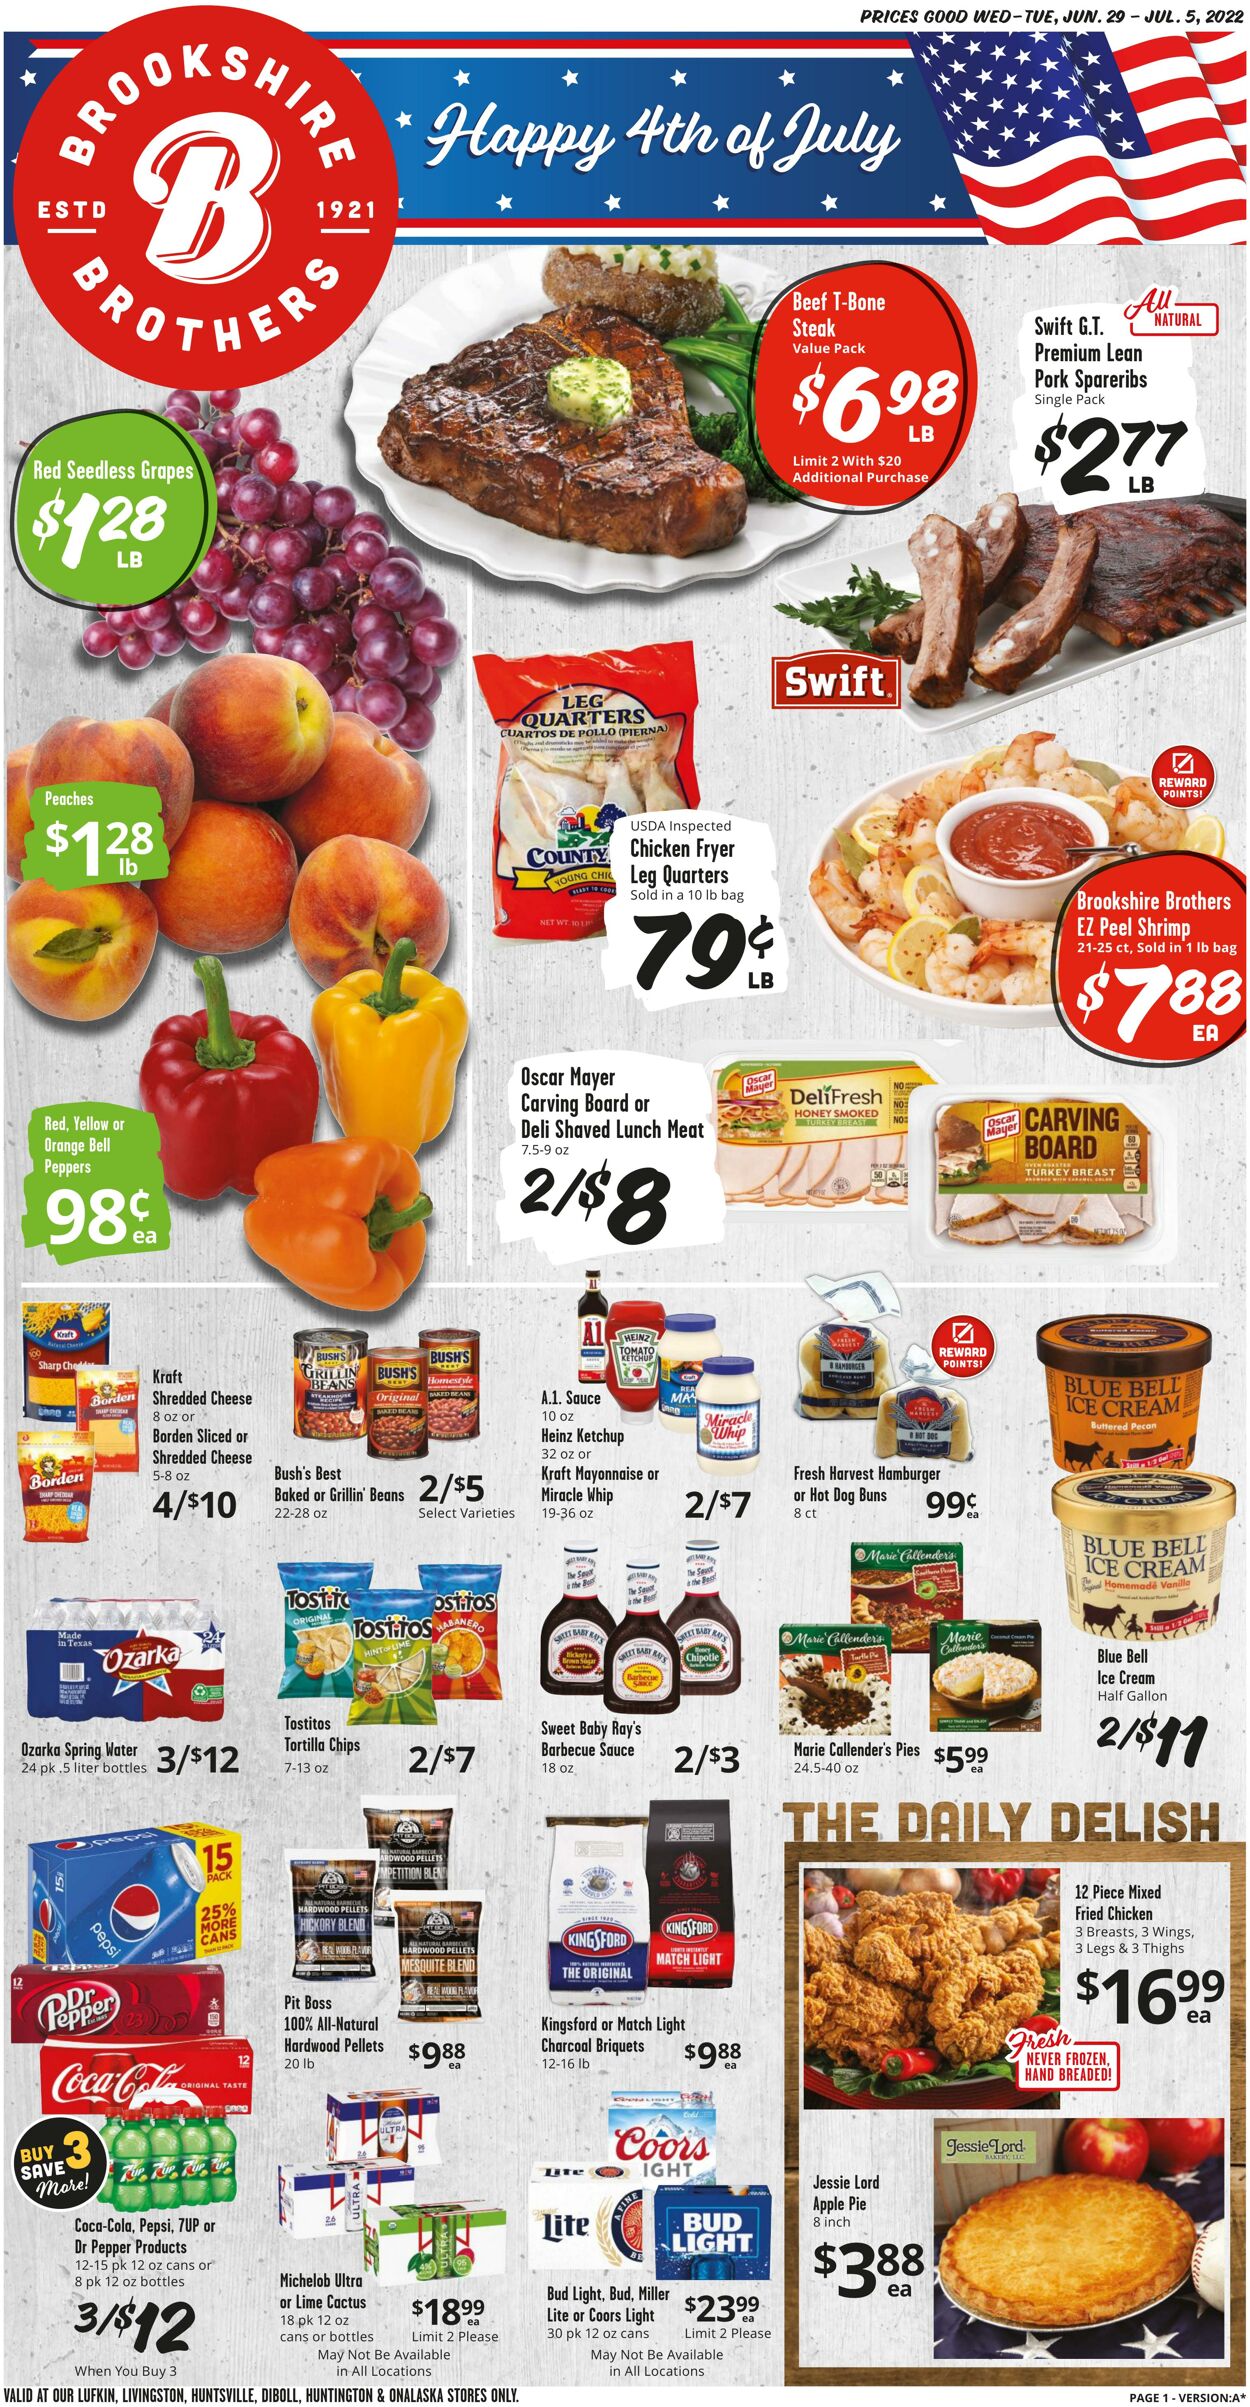 Weekly ad Brookshire Brothers 06/29/2022 - 07/05/2022